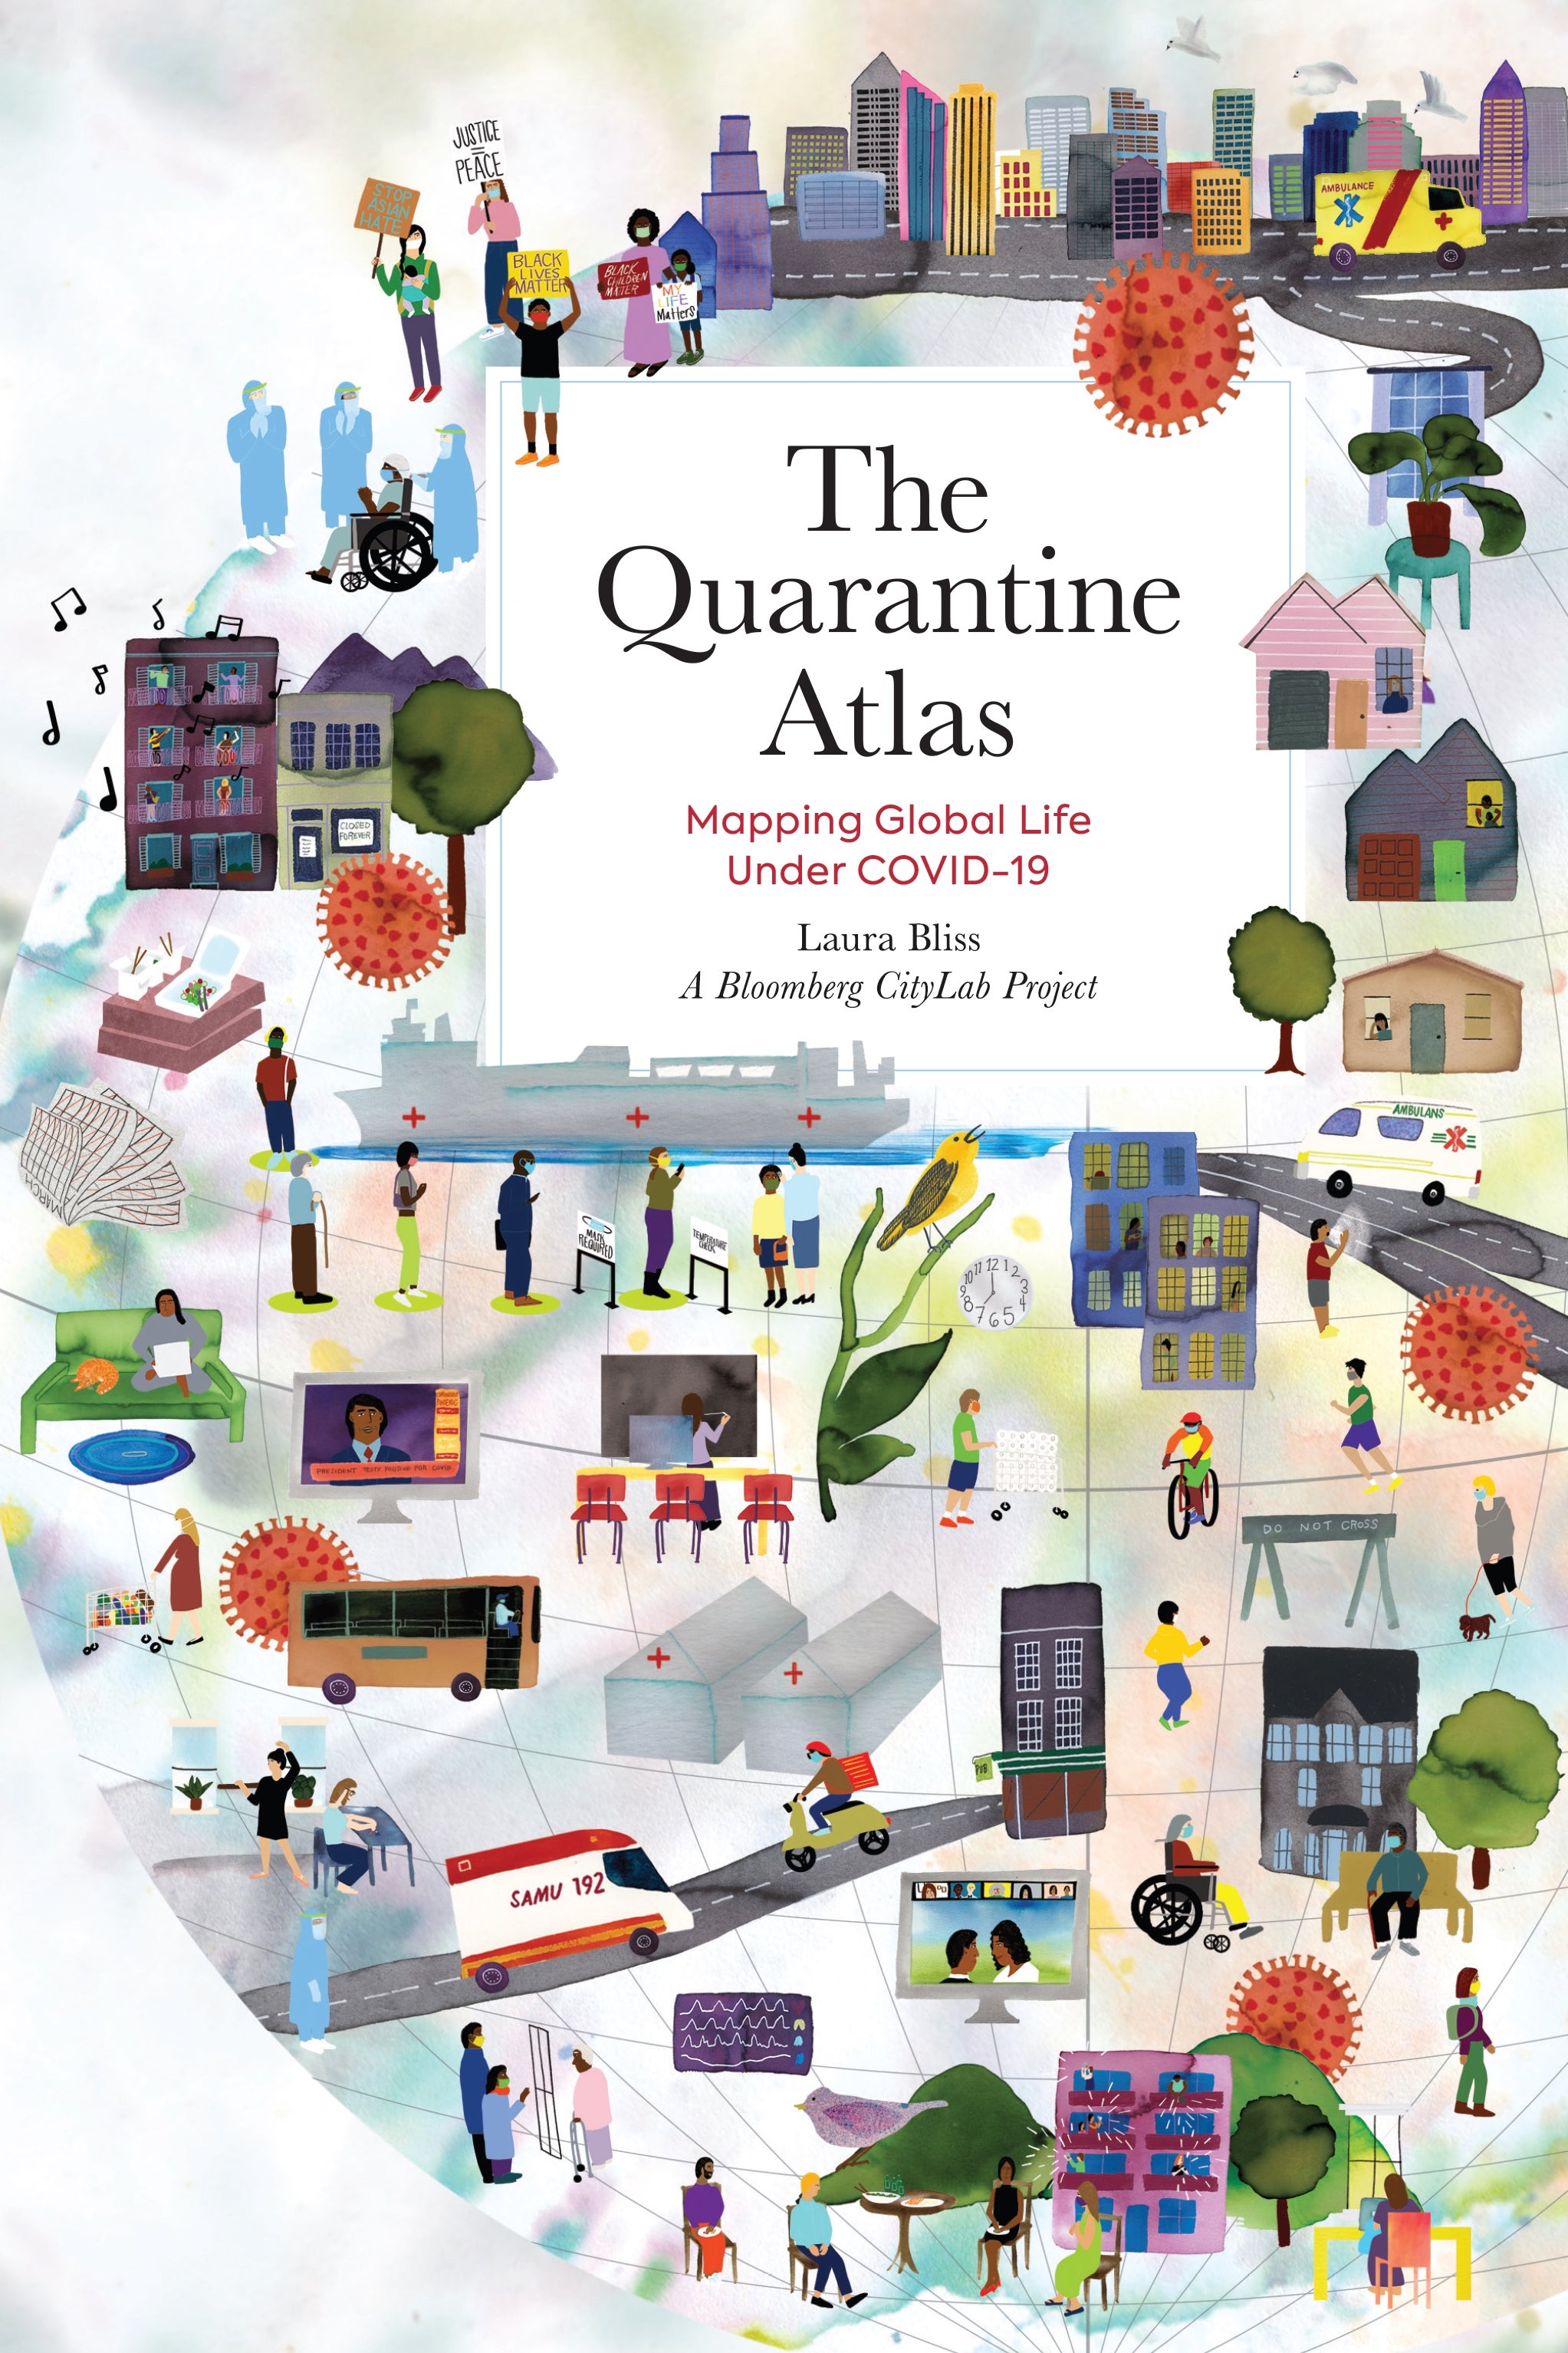 The cover of the book The Quarantine Atlas.